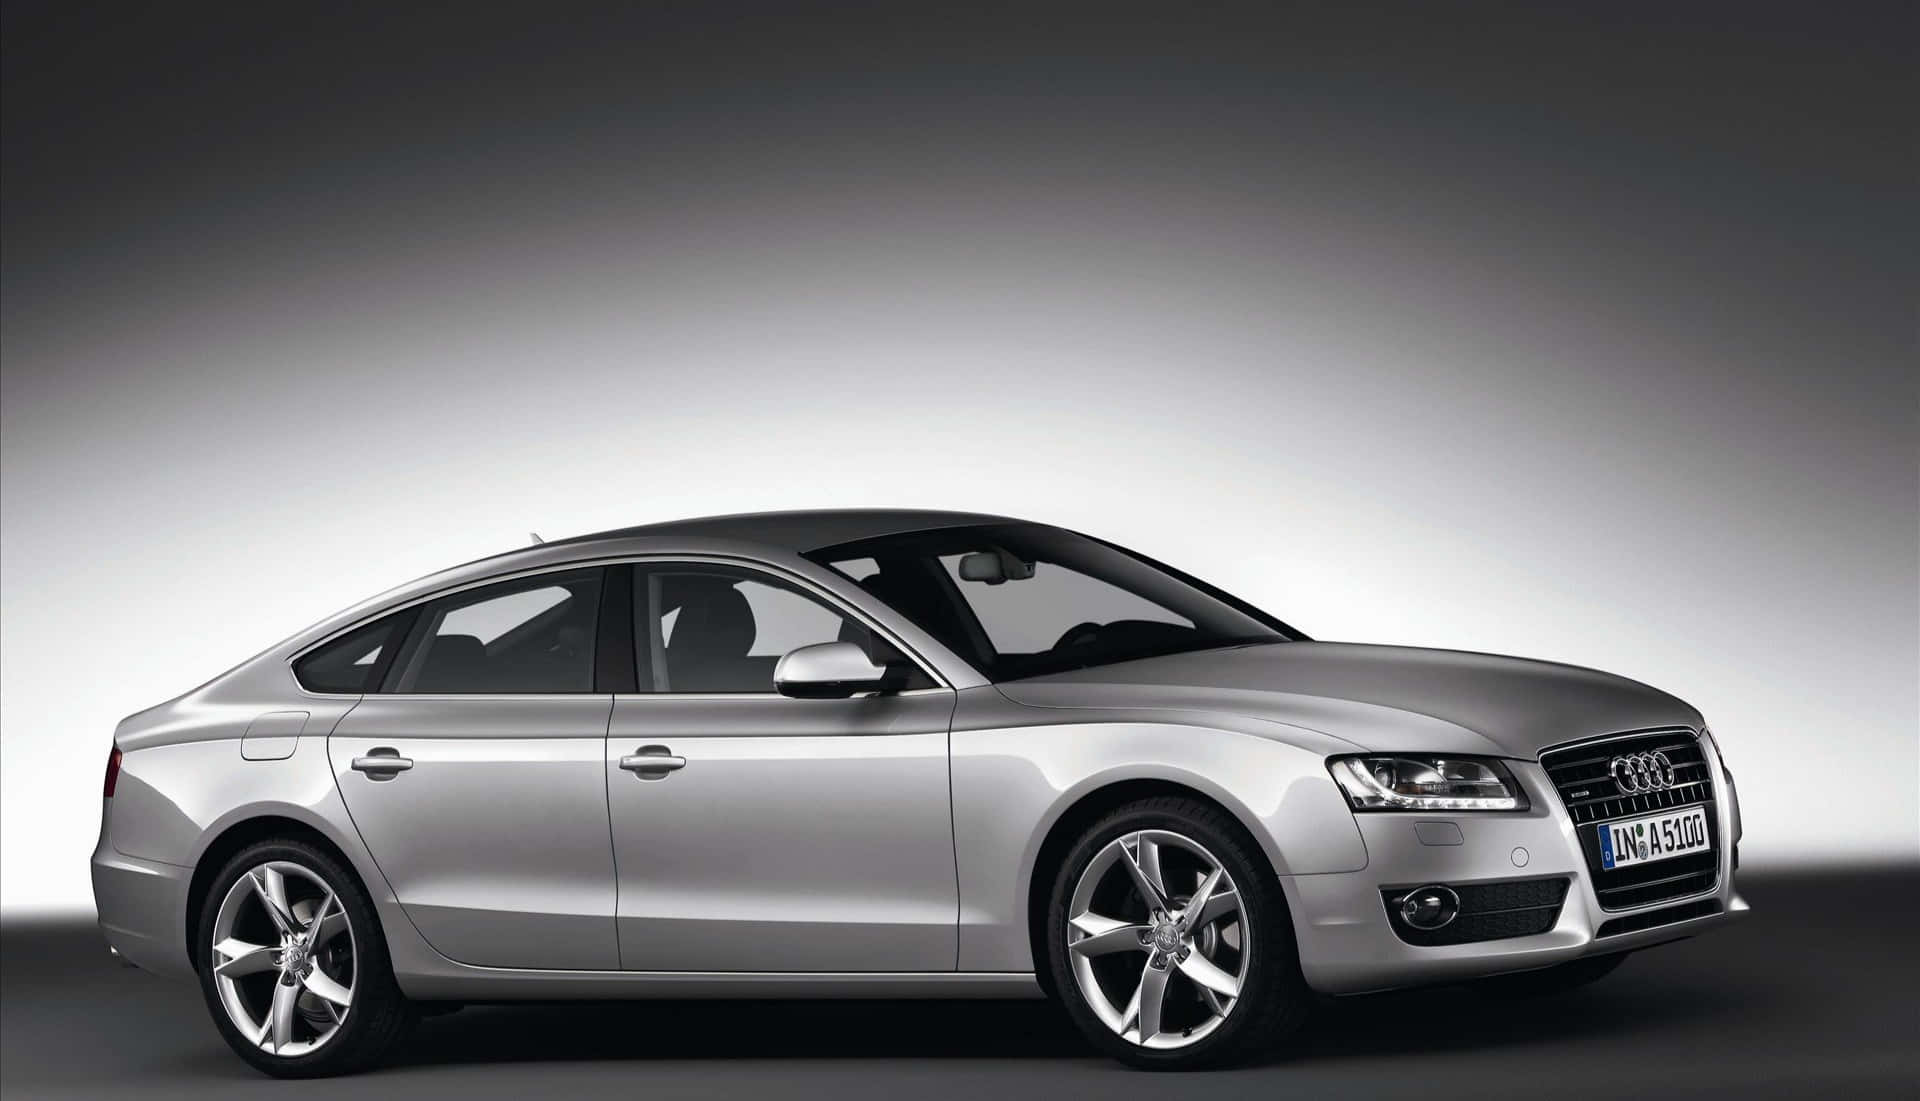 Sleek and stylish Audi A5 on the road Wallpaper